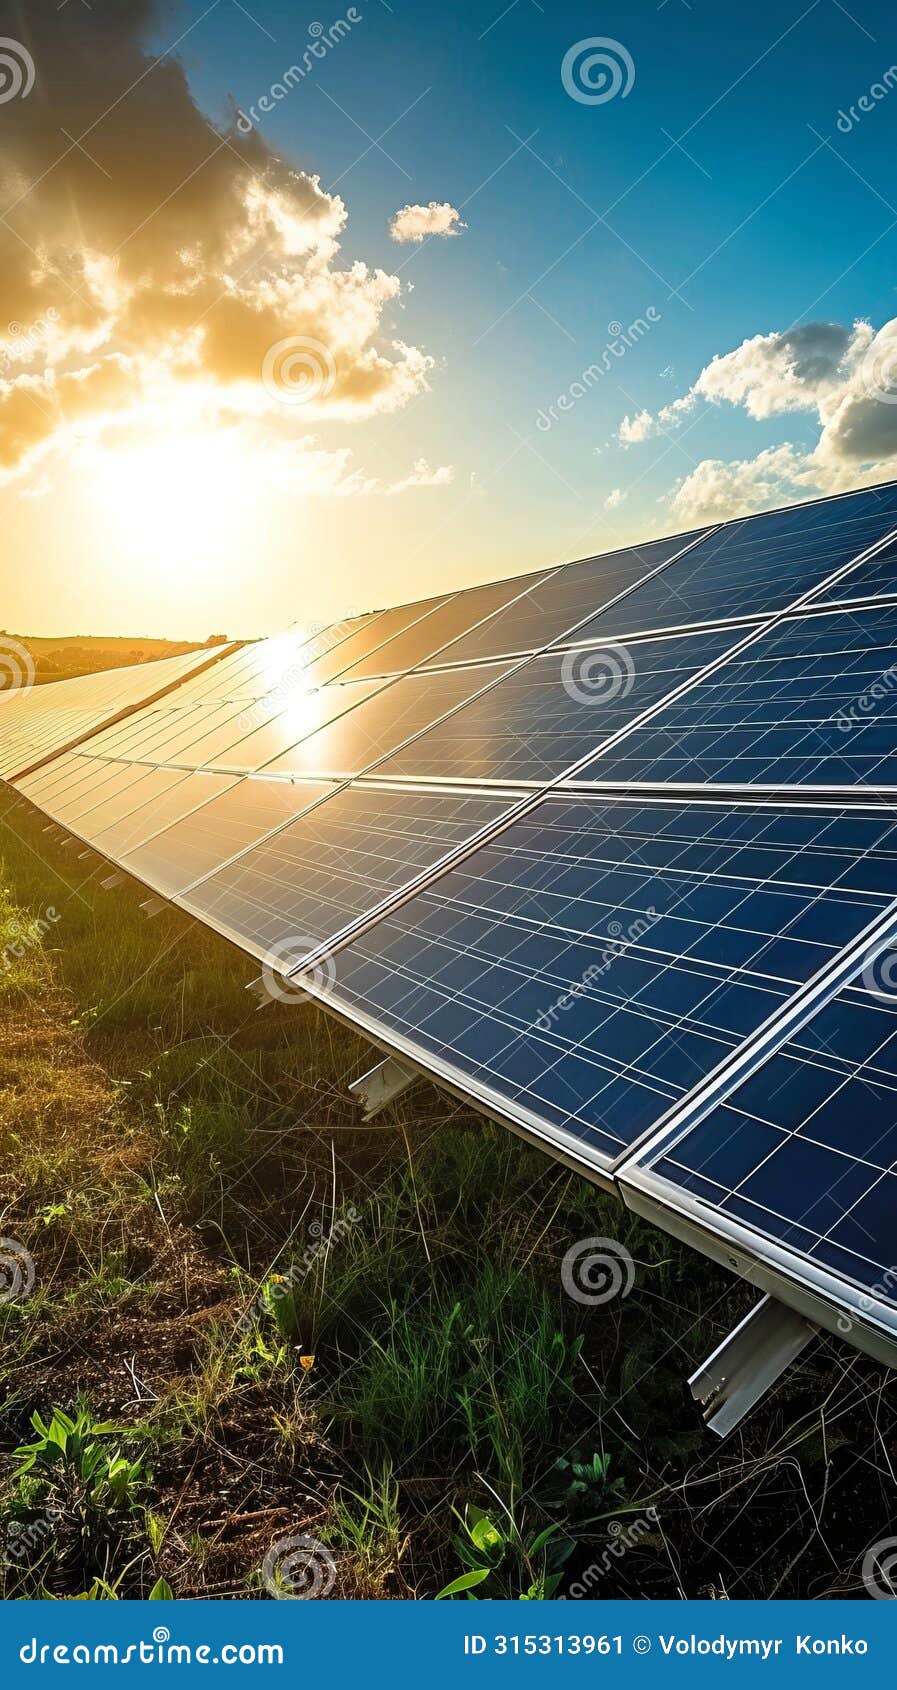 solar panel in field with setting sun, harnessing renewable energy